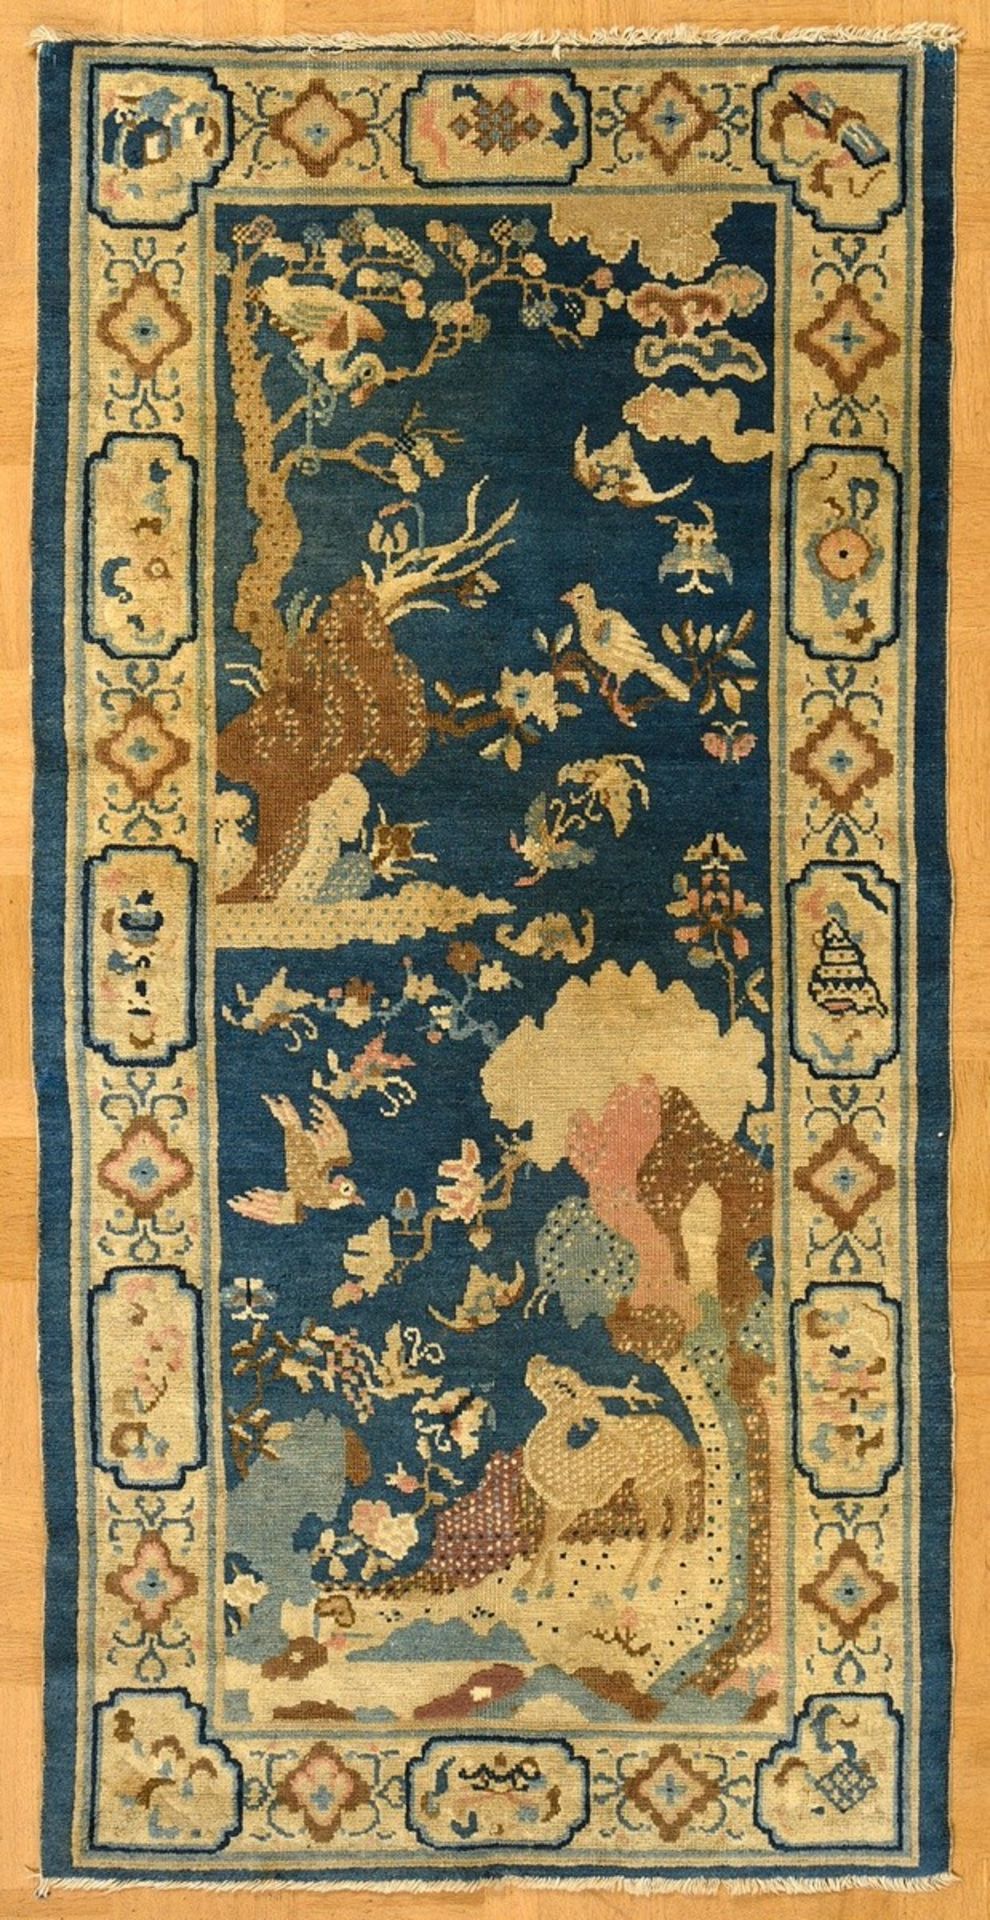 Antique Chinese pow tow bridge "Landscape with deer, various birds, butterflies and bats" in detail